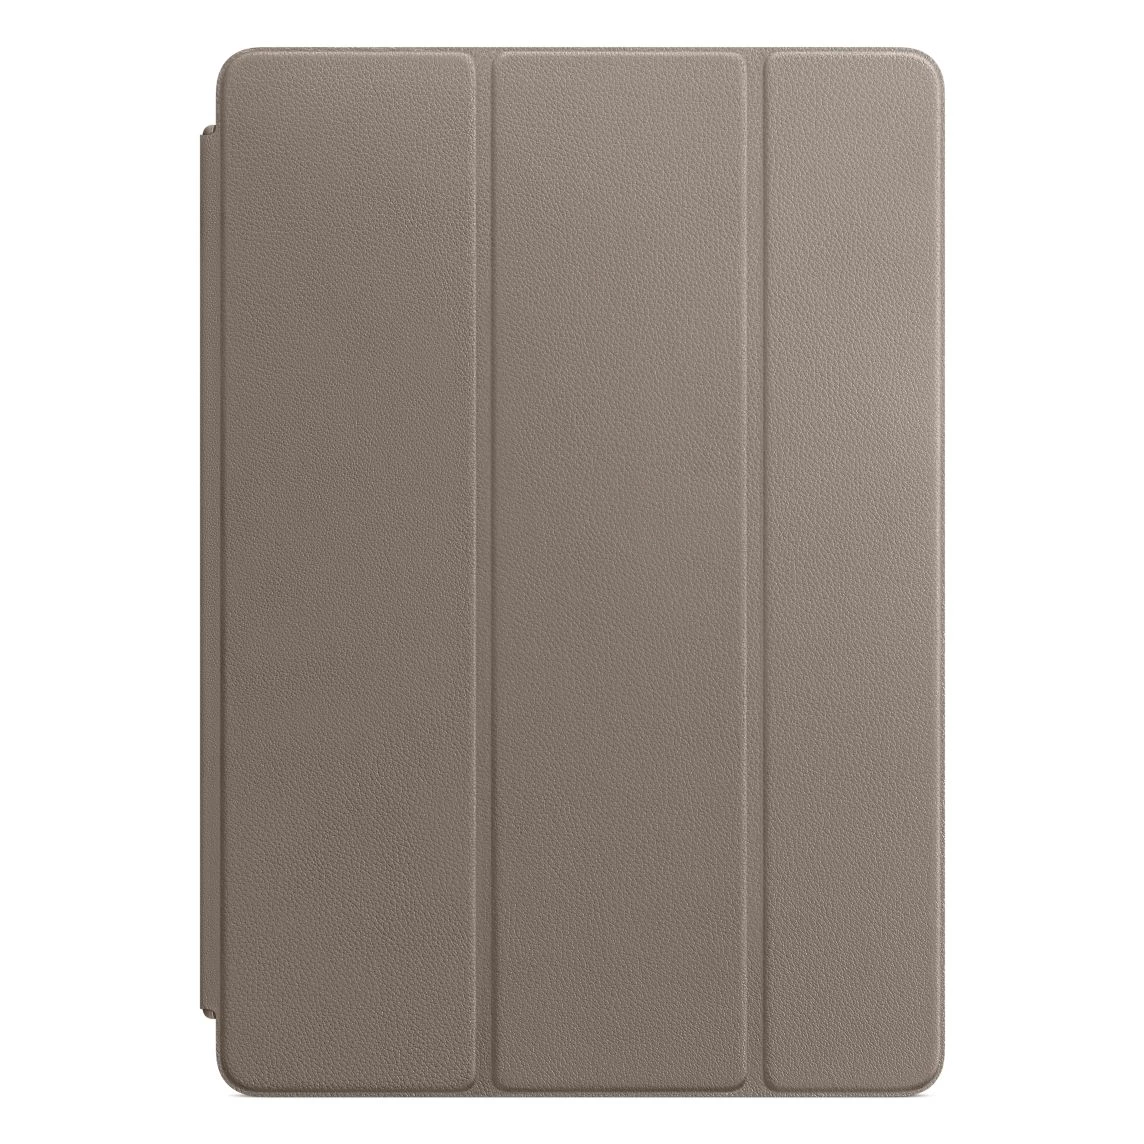 Apple Leather Smart Cover for iPad 10.2" / Air 3 / Pro 10.5" - Taupe (MPU82)